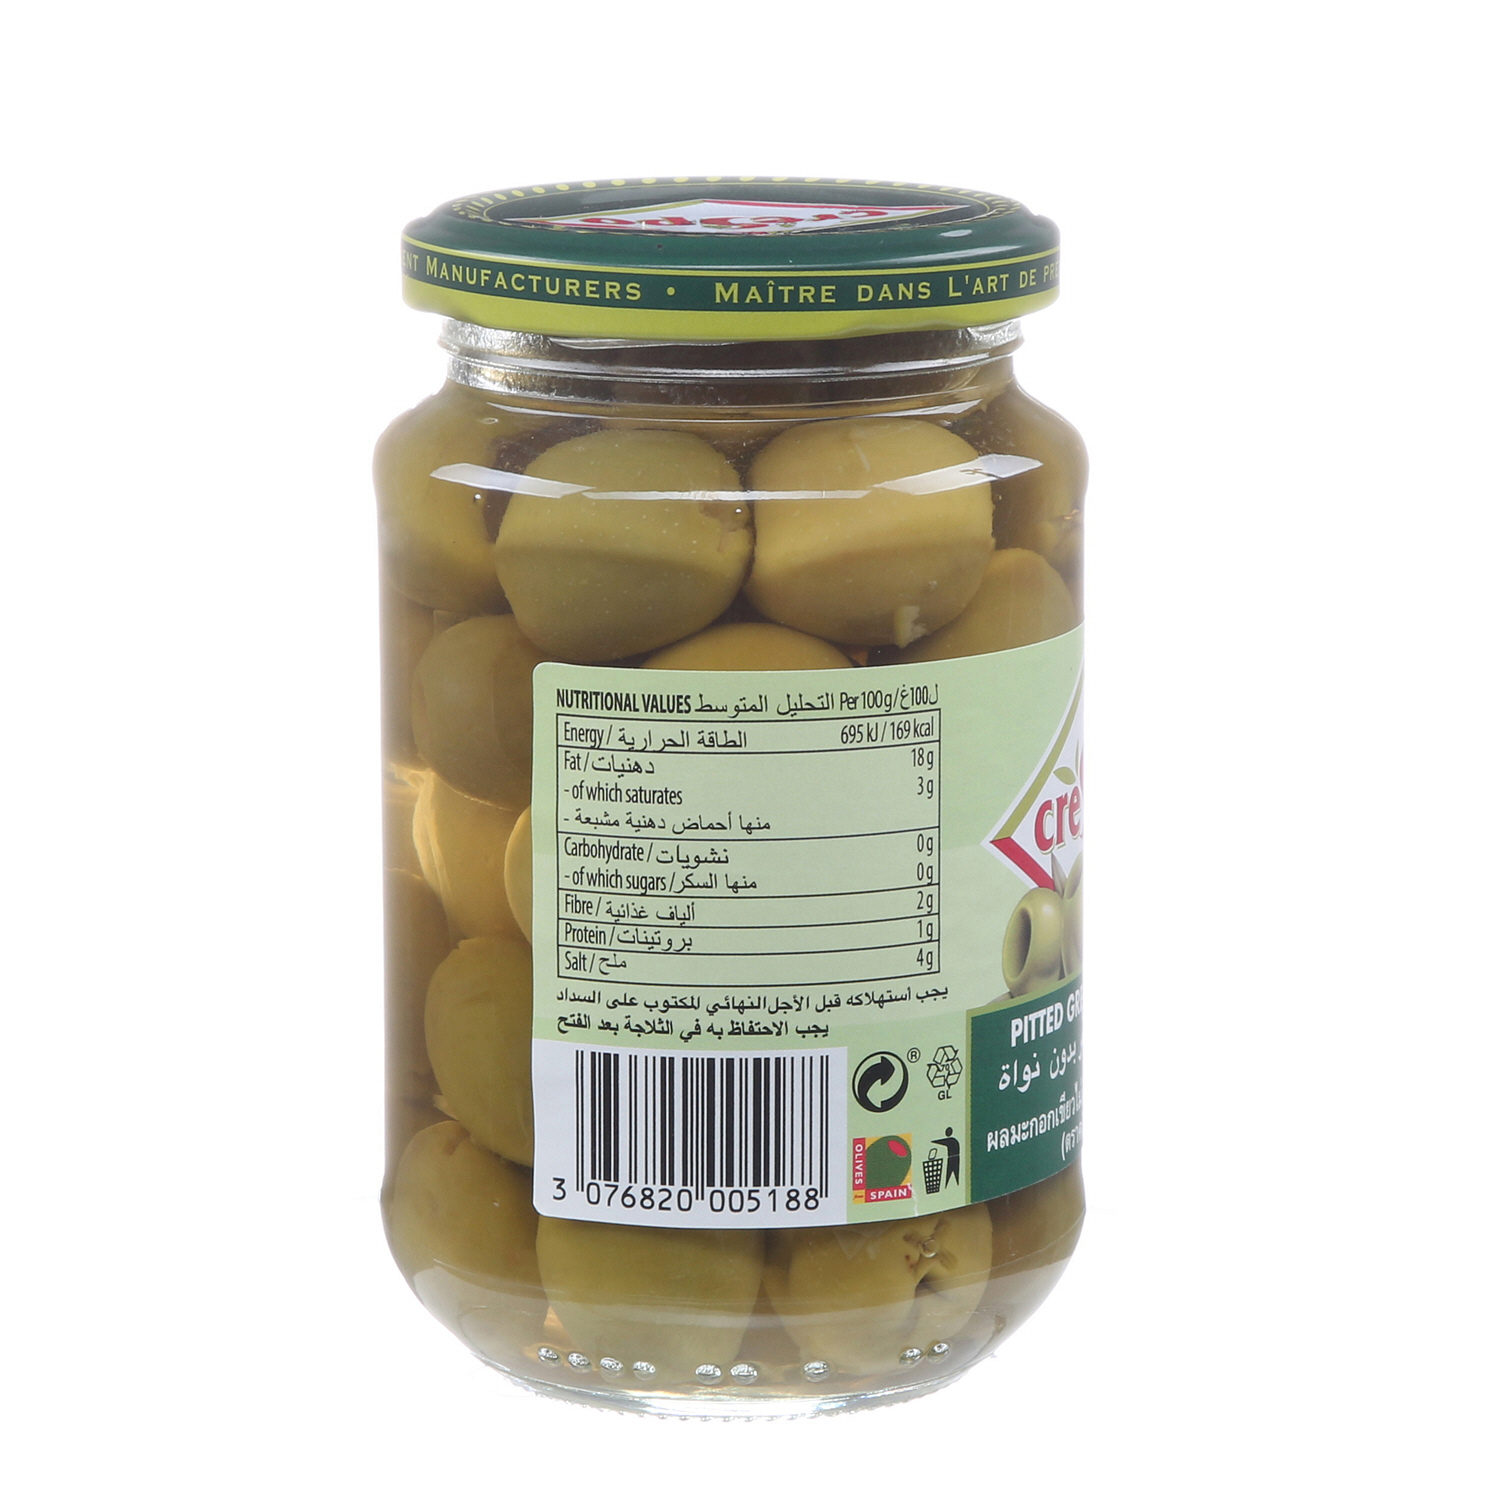 Crespo Pitted Green Olives Jar 160gm